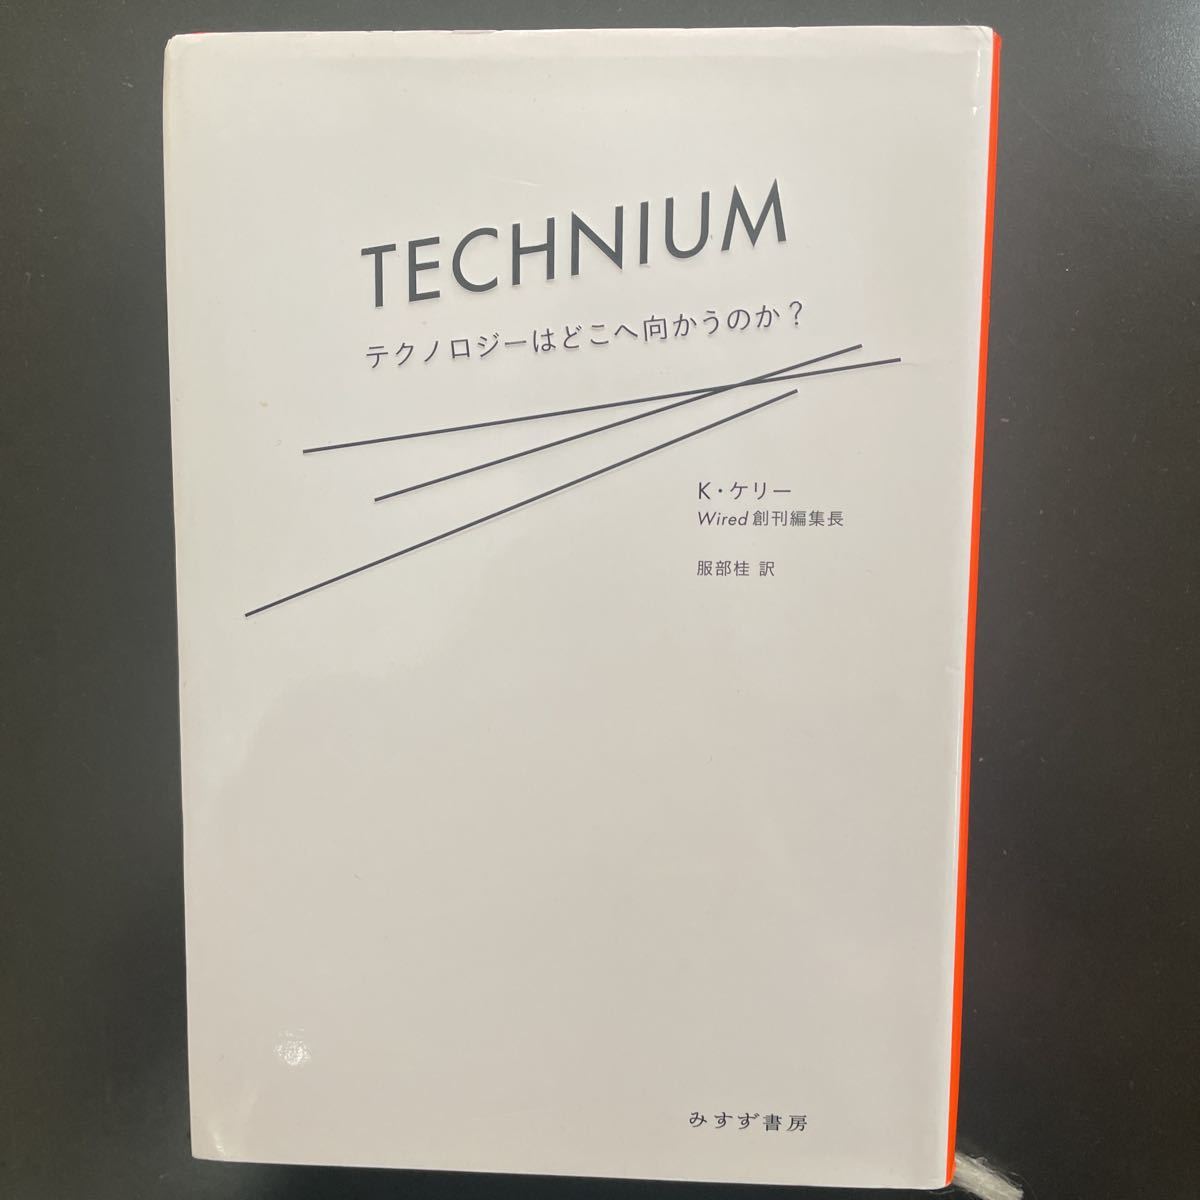  used technni um= TECHNIUM : technology is ... direction ... .? Kevin Kelly 